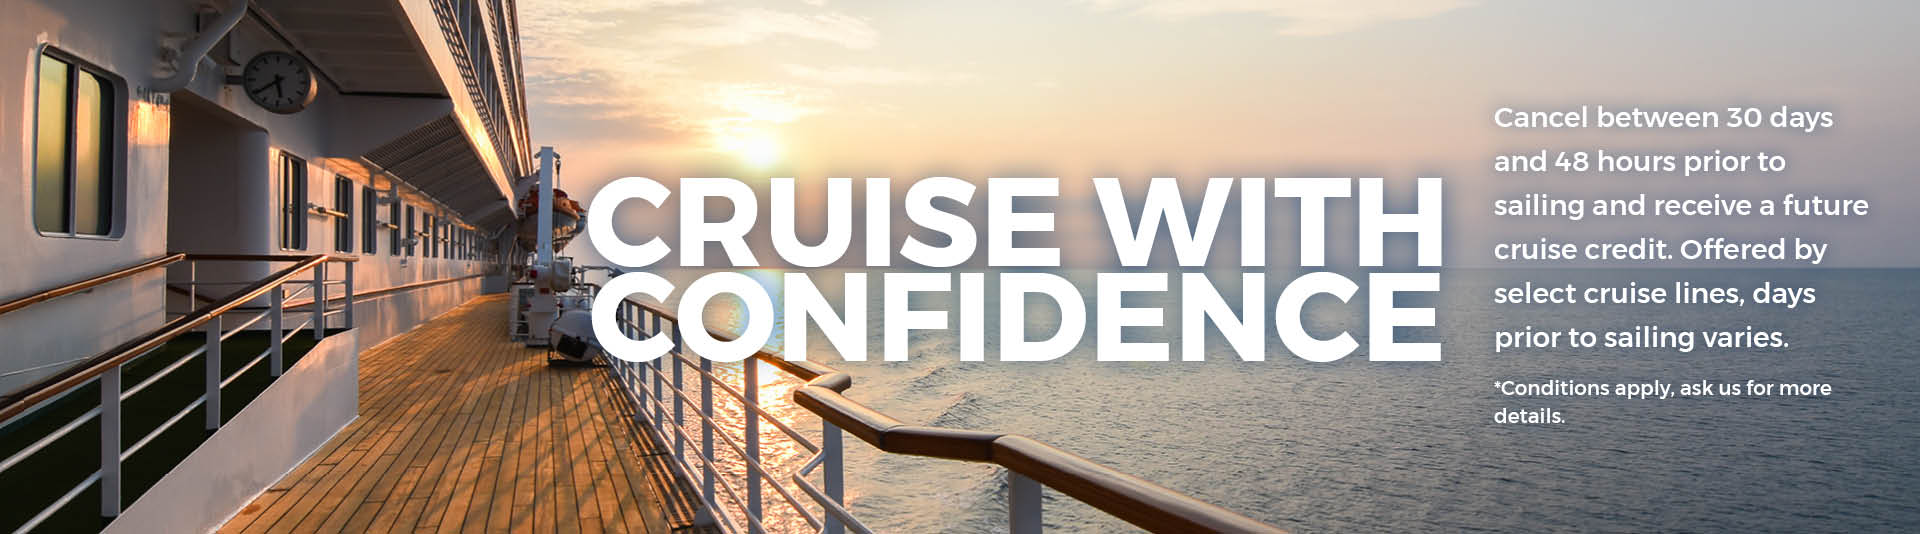 cruise-with-confidence.jpg (1)